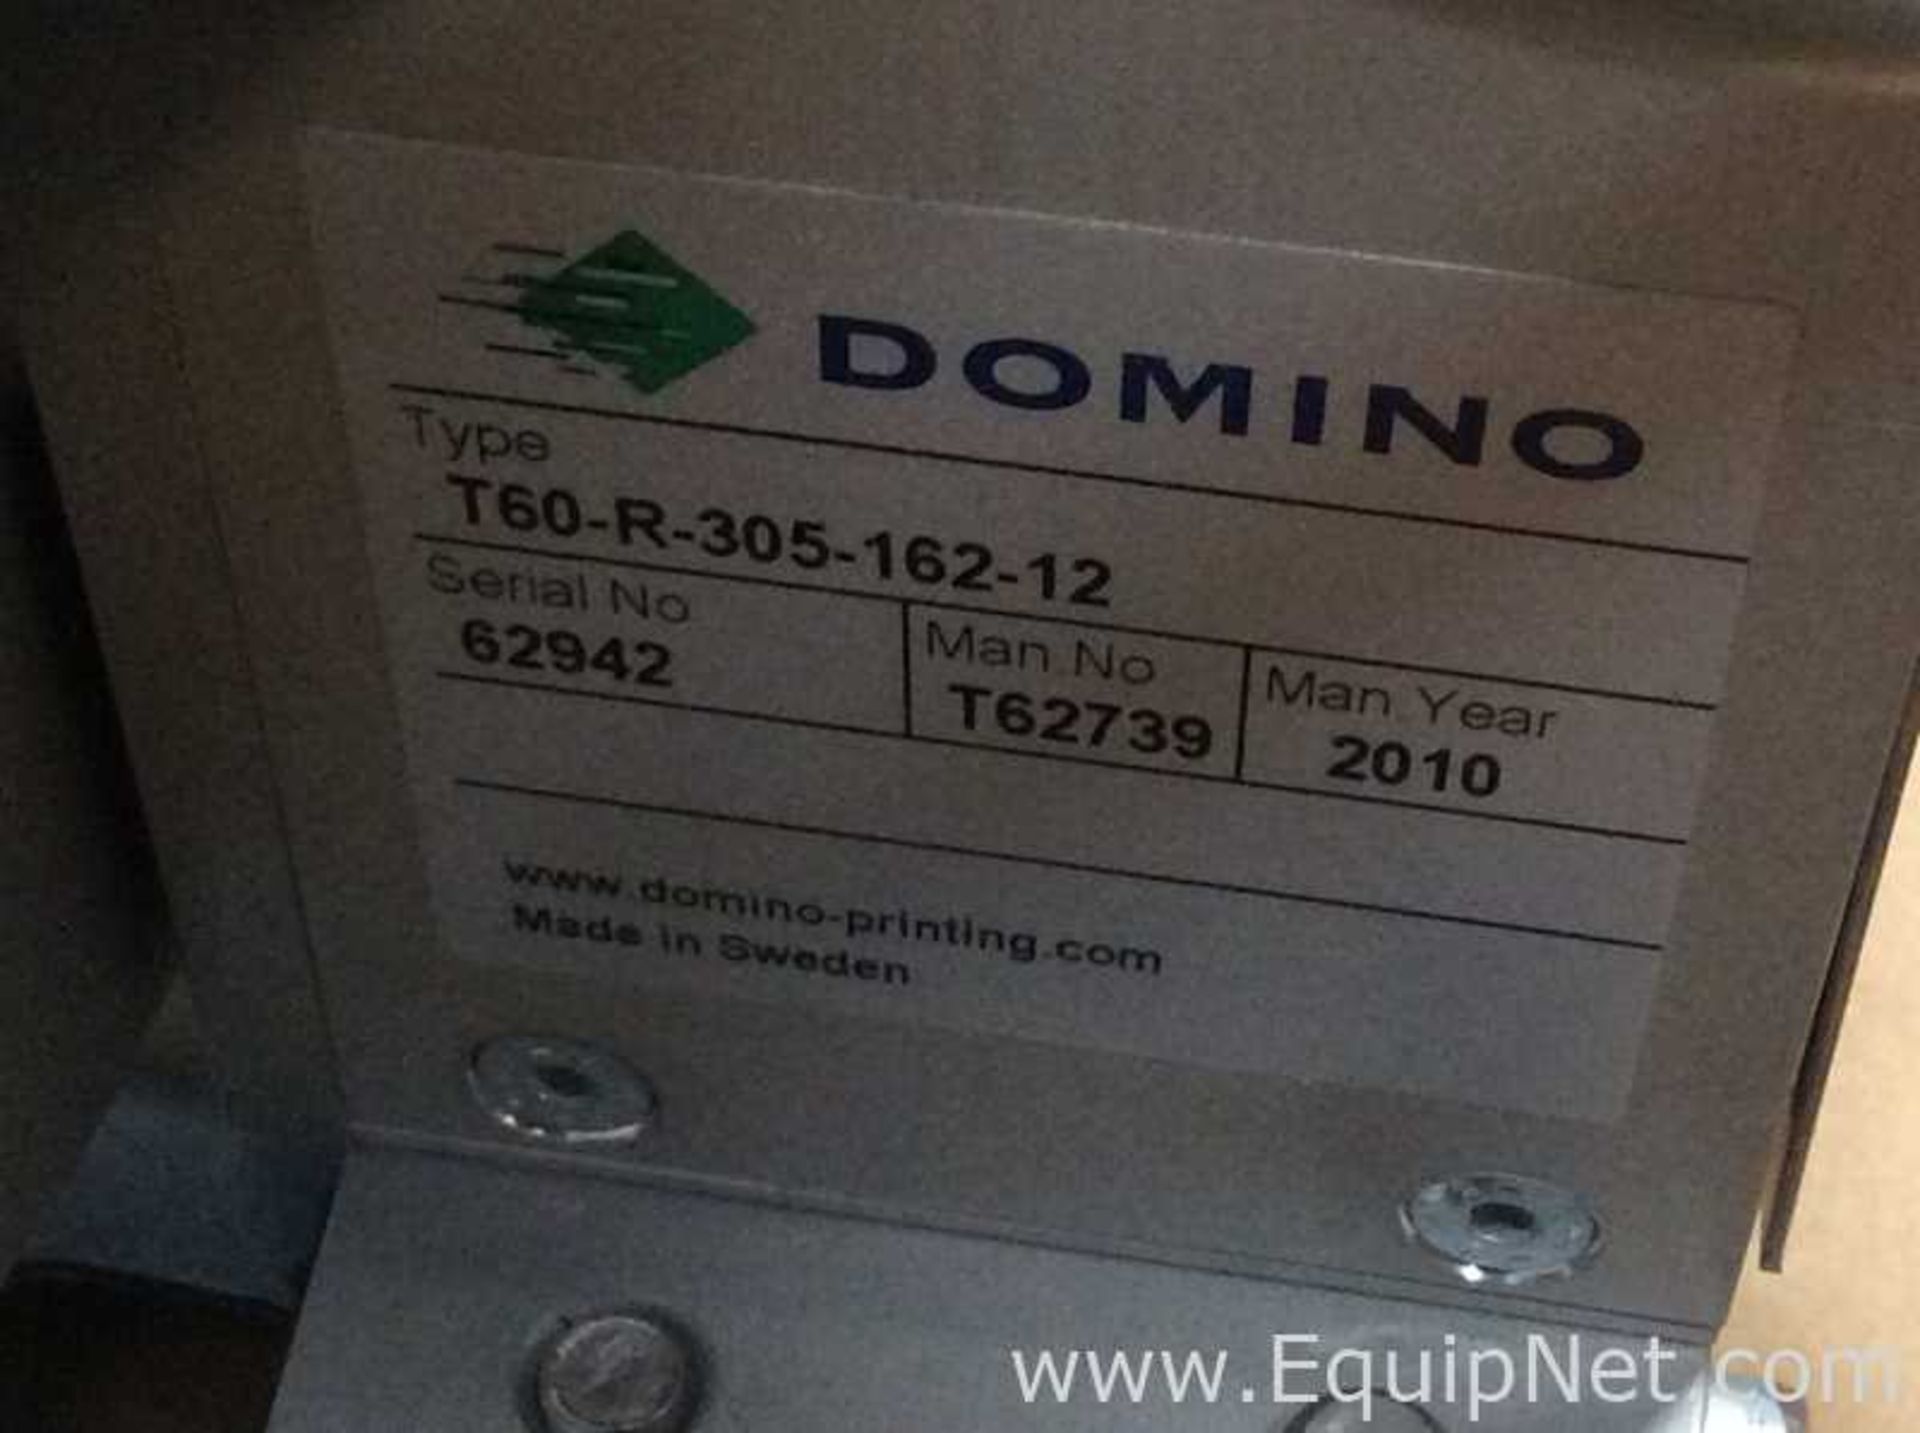 Domino Printing T60-R-305-162-12 Automatic Labeler - Image 5 of 12